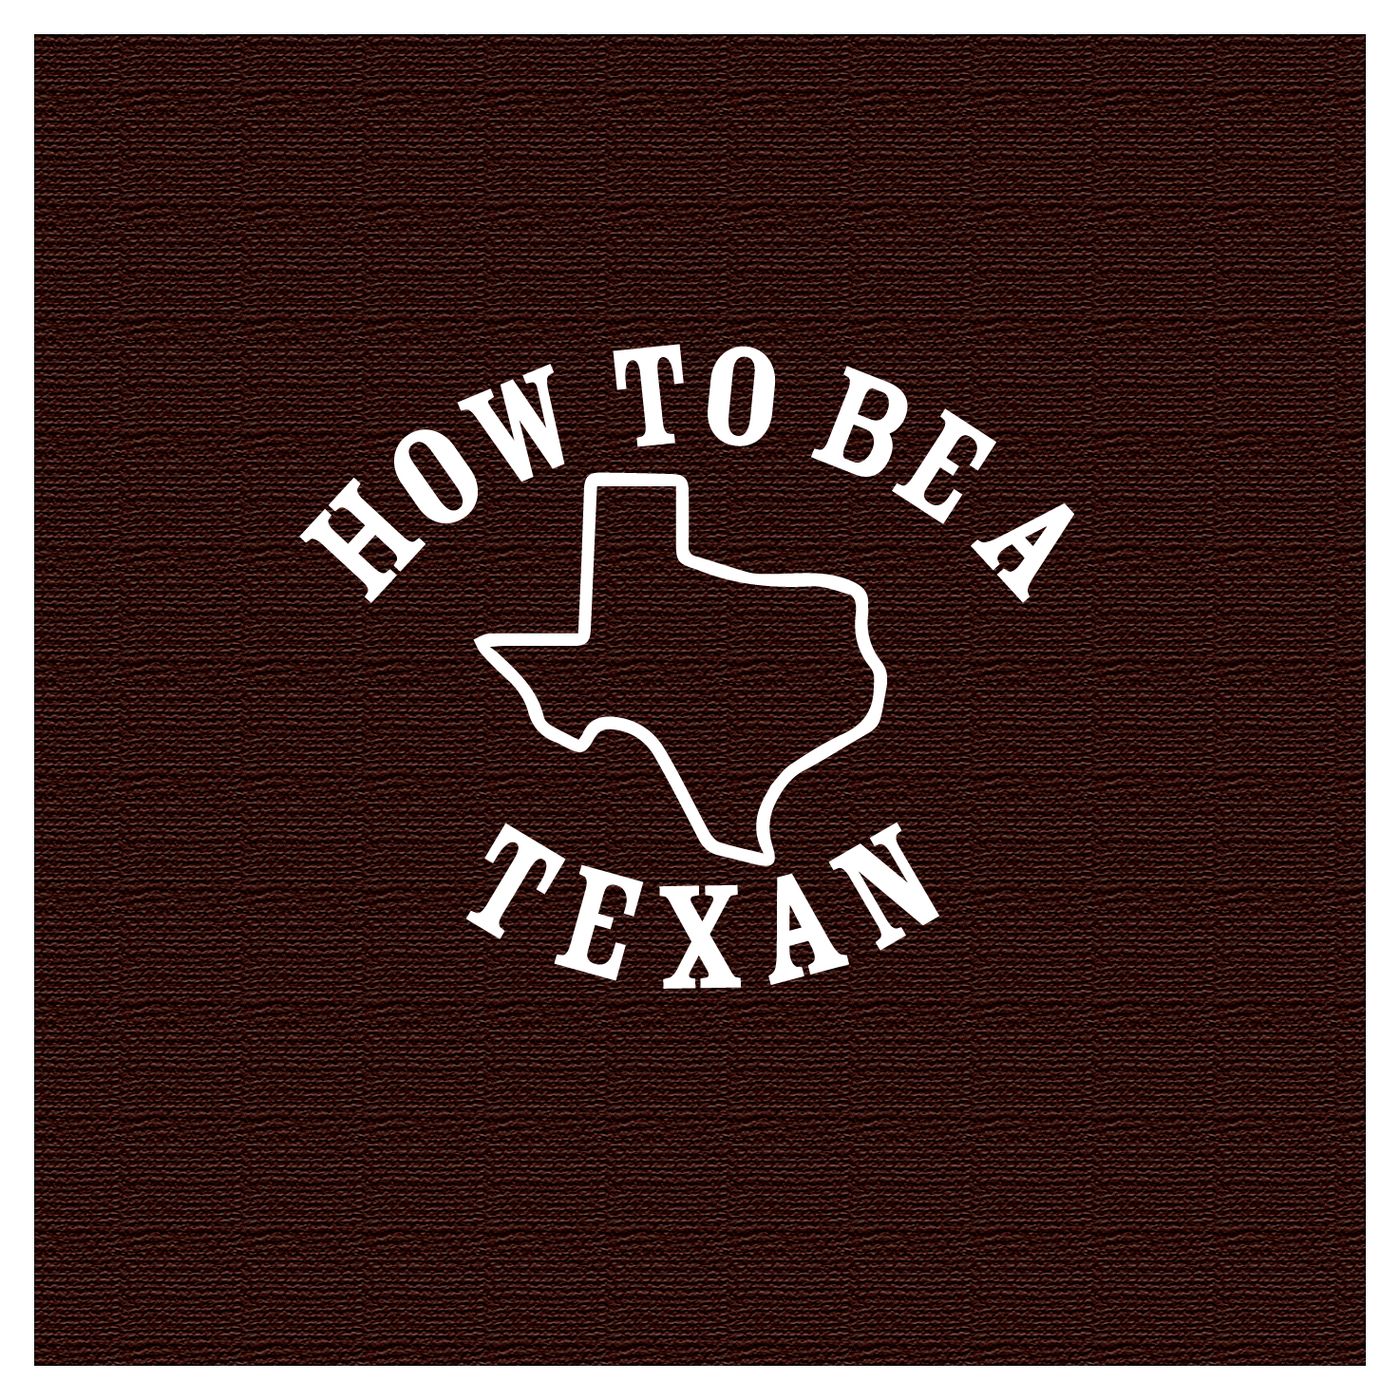 How to be a Texan